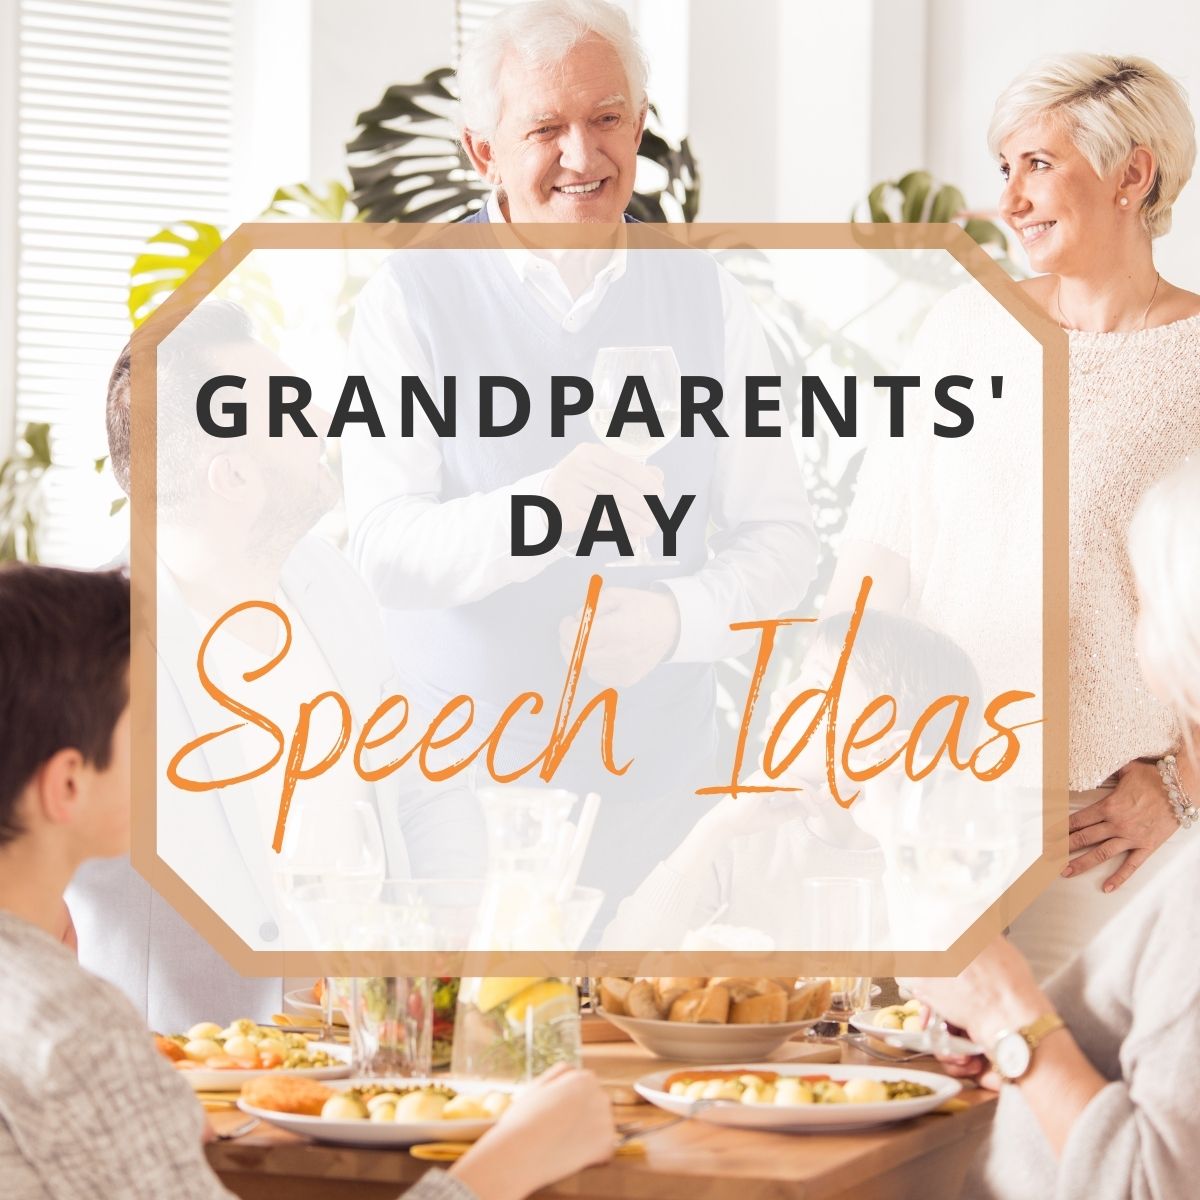 grandparents making a speech in front of family